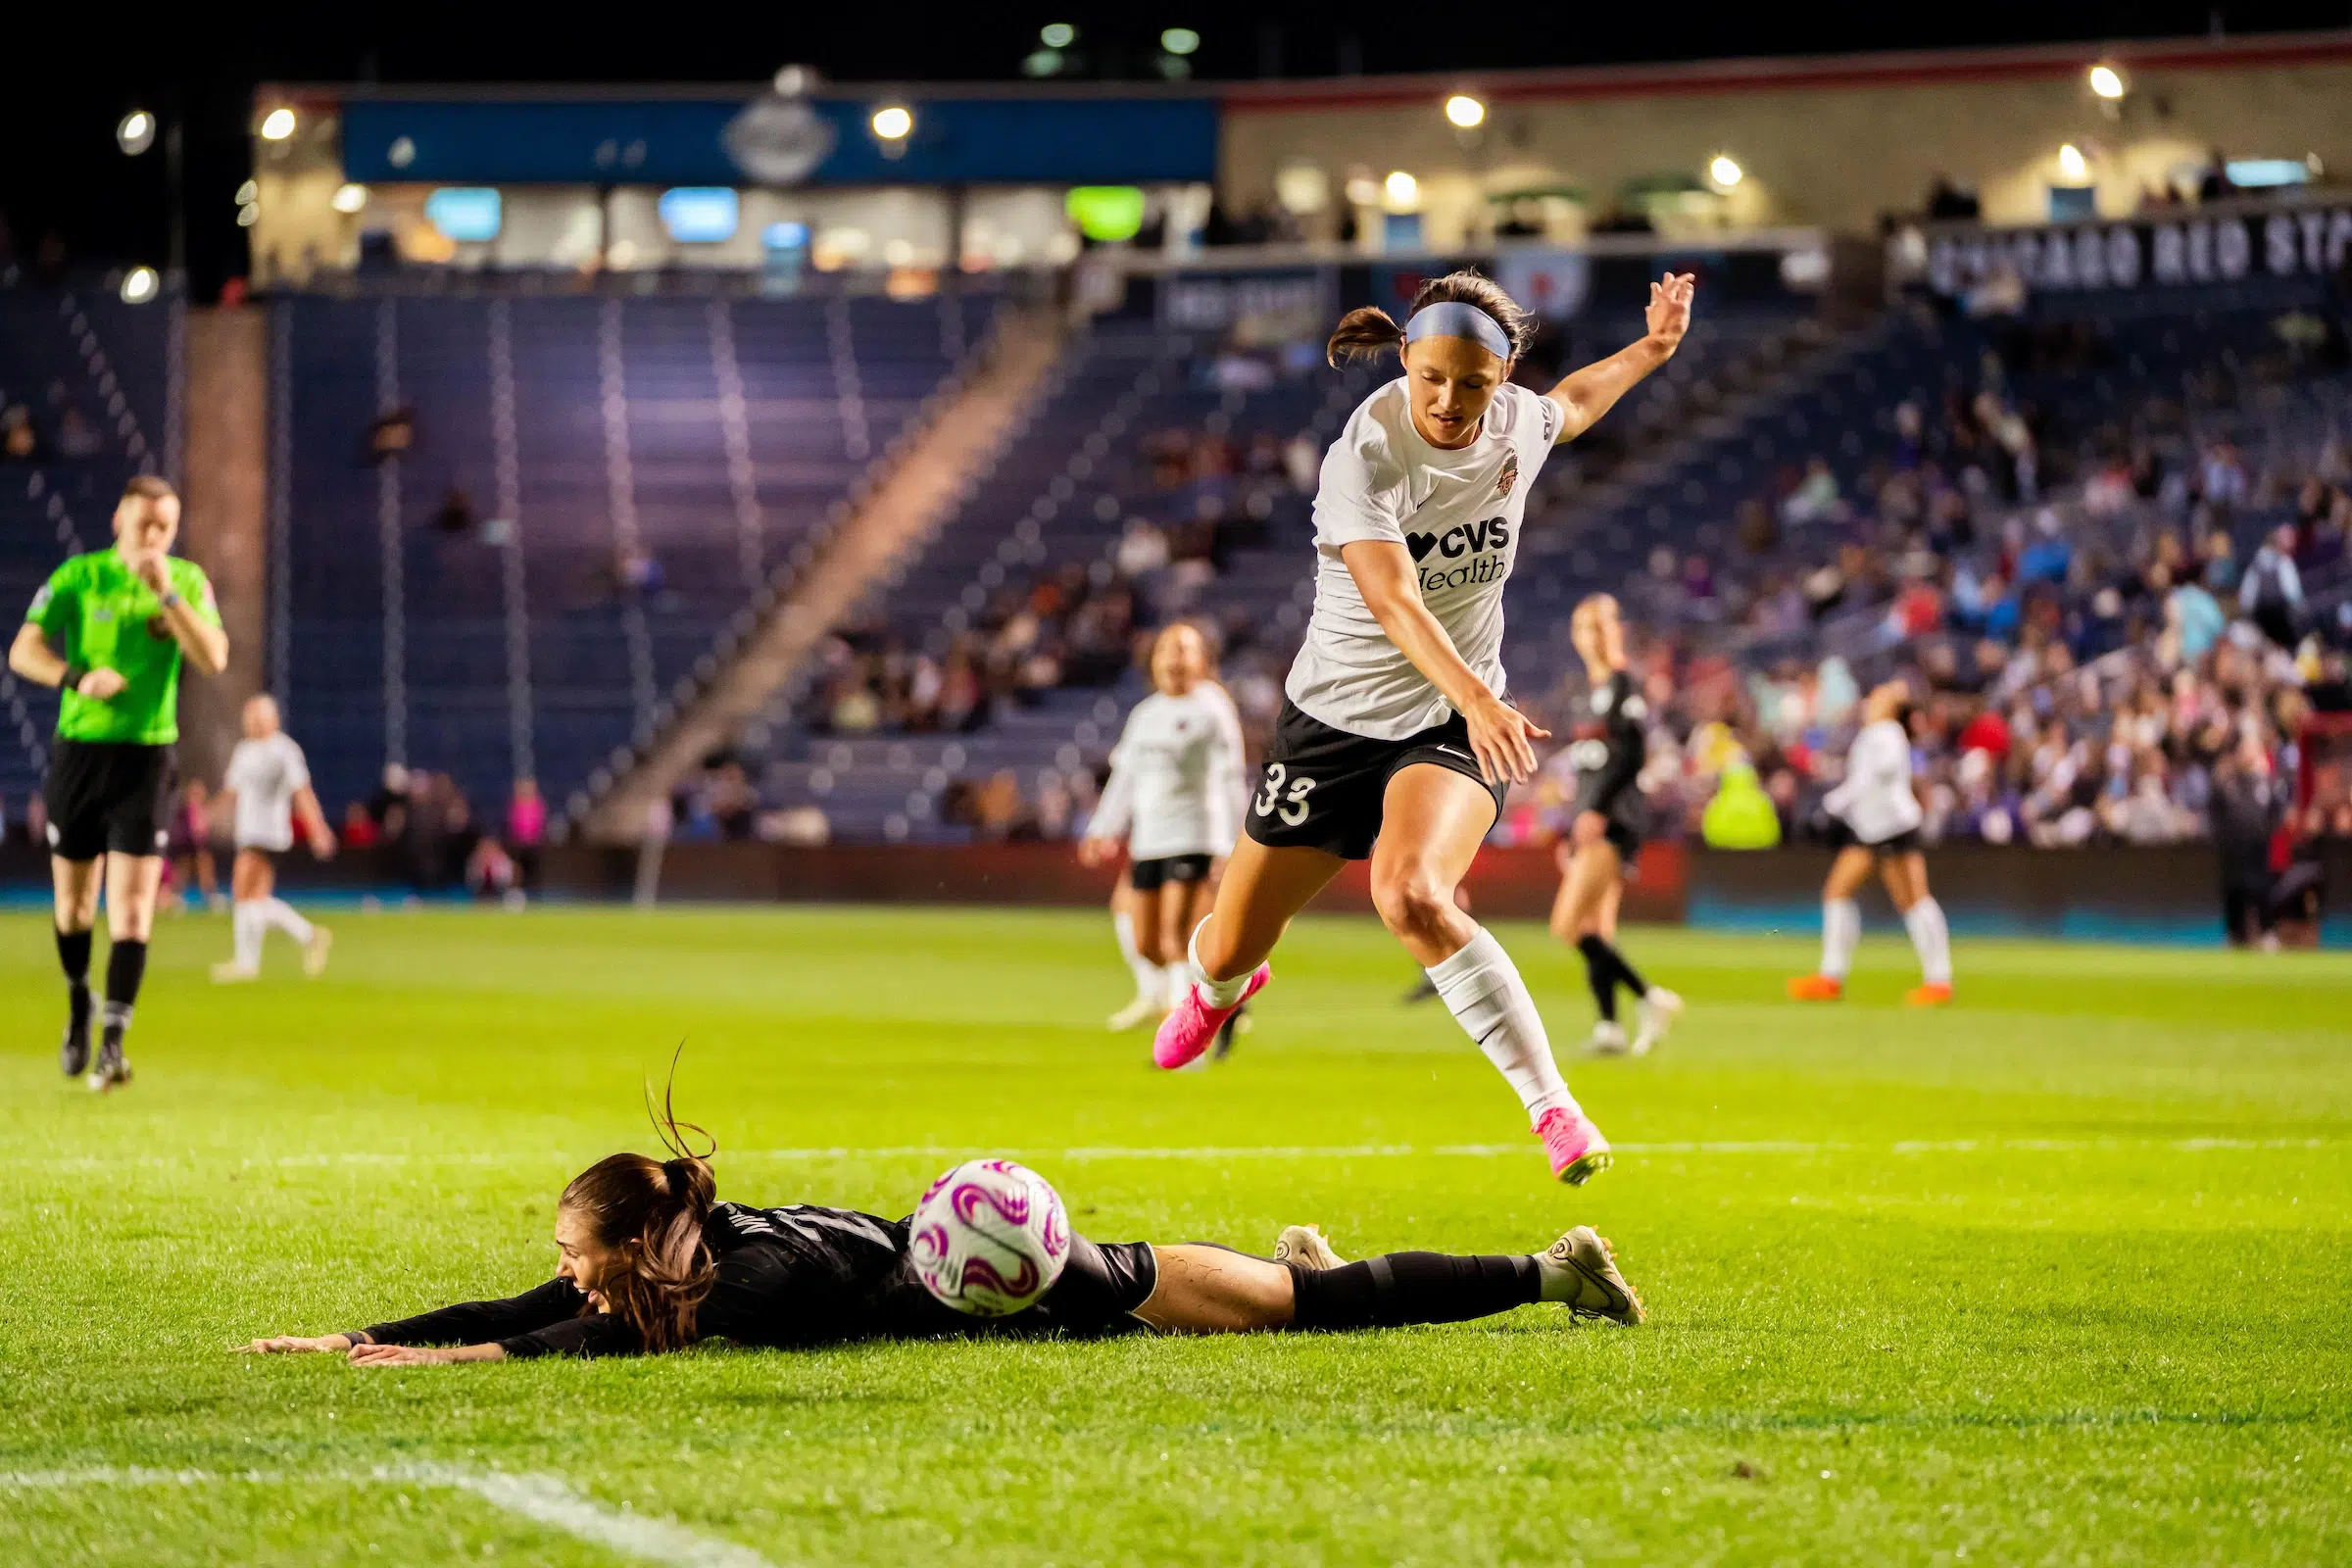 Preview: Spirit Looks to Capture Much-Needed Three Points as Playoffs Draw Nearer Featured Image